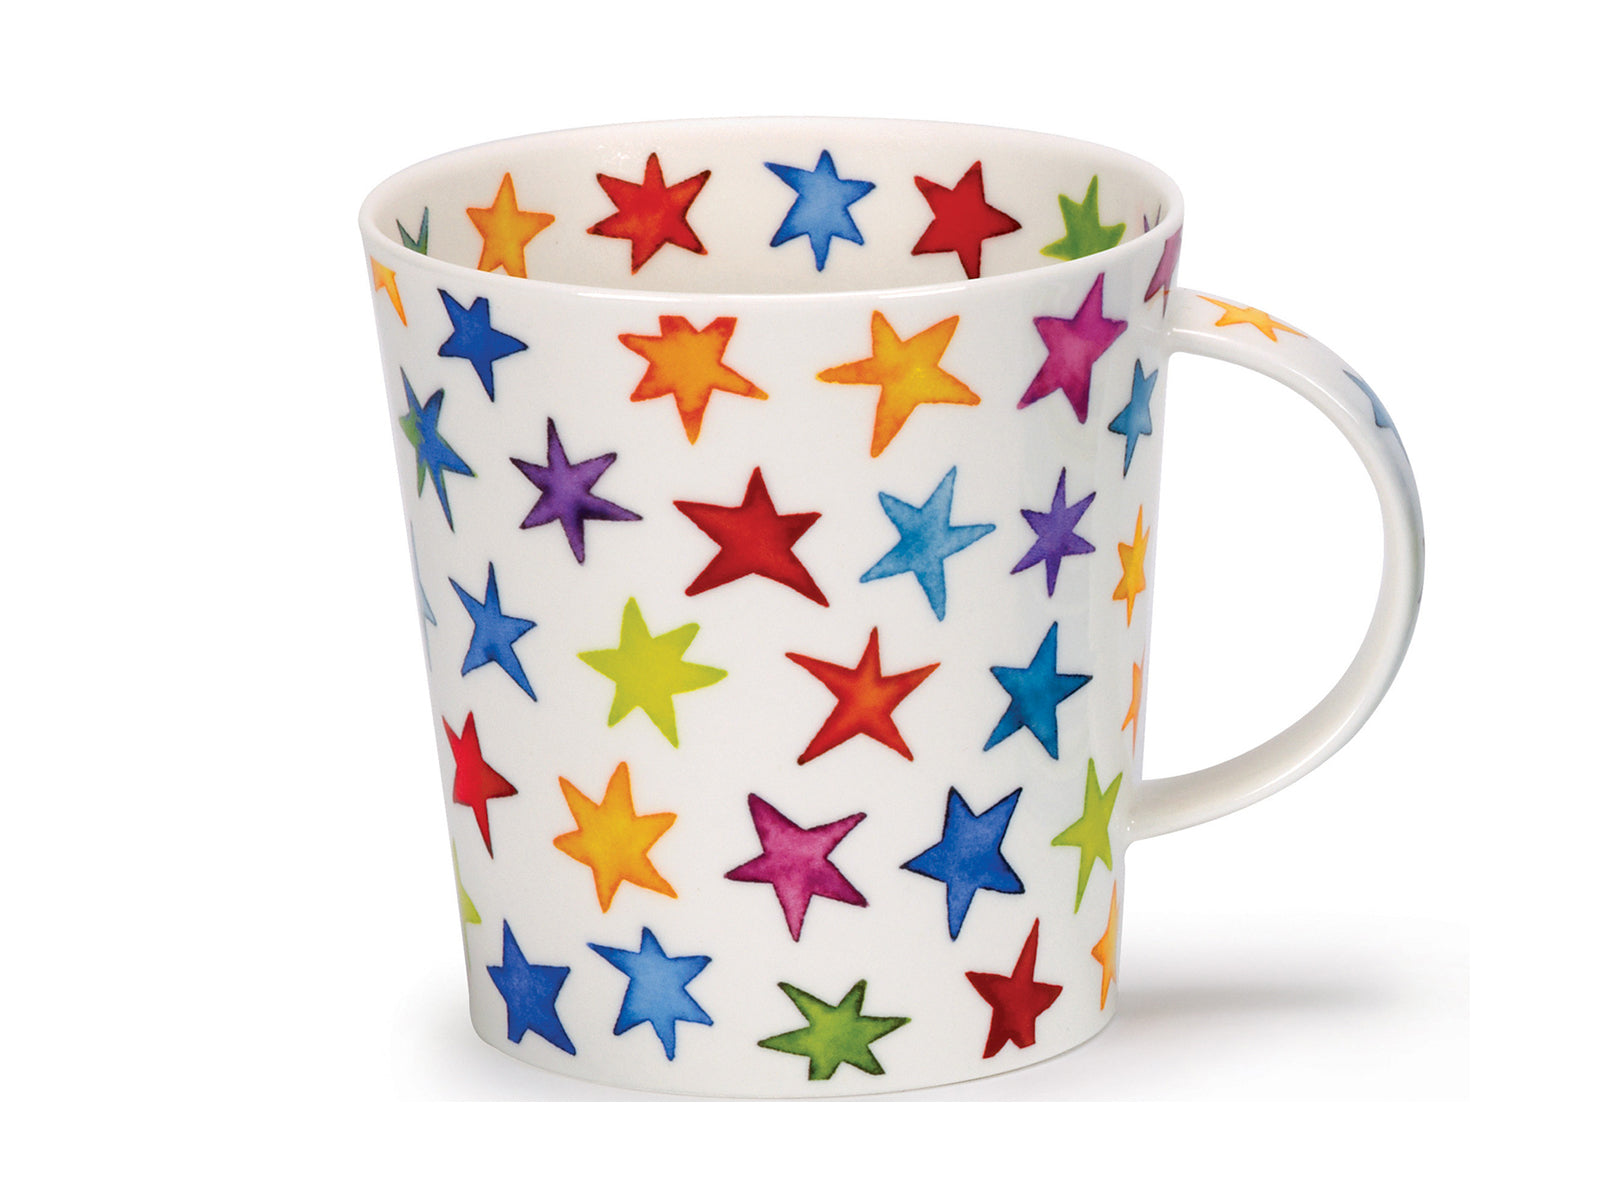 This Dunoon Cairngorm Starburst Mug is made from fine bone china and has been decorated with multicoloured stars in varying sizes all around its exterior. There are stars printed along the handle and around the inner rim of the mug. It is slightly larger in size and would be good for big cups of tea or coffee.